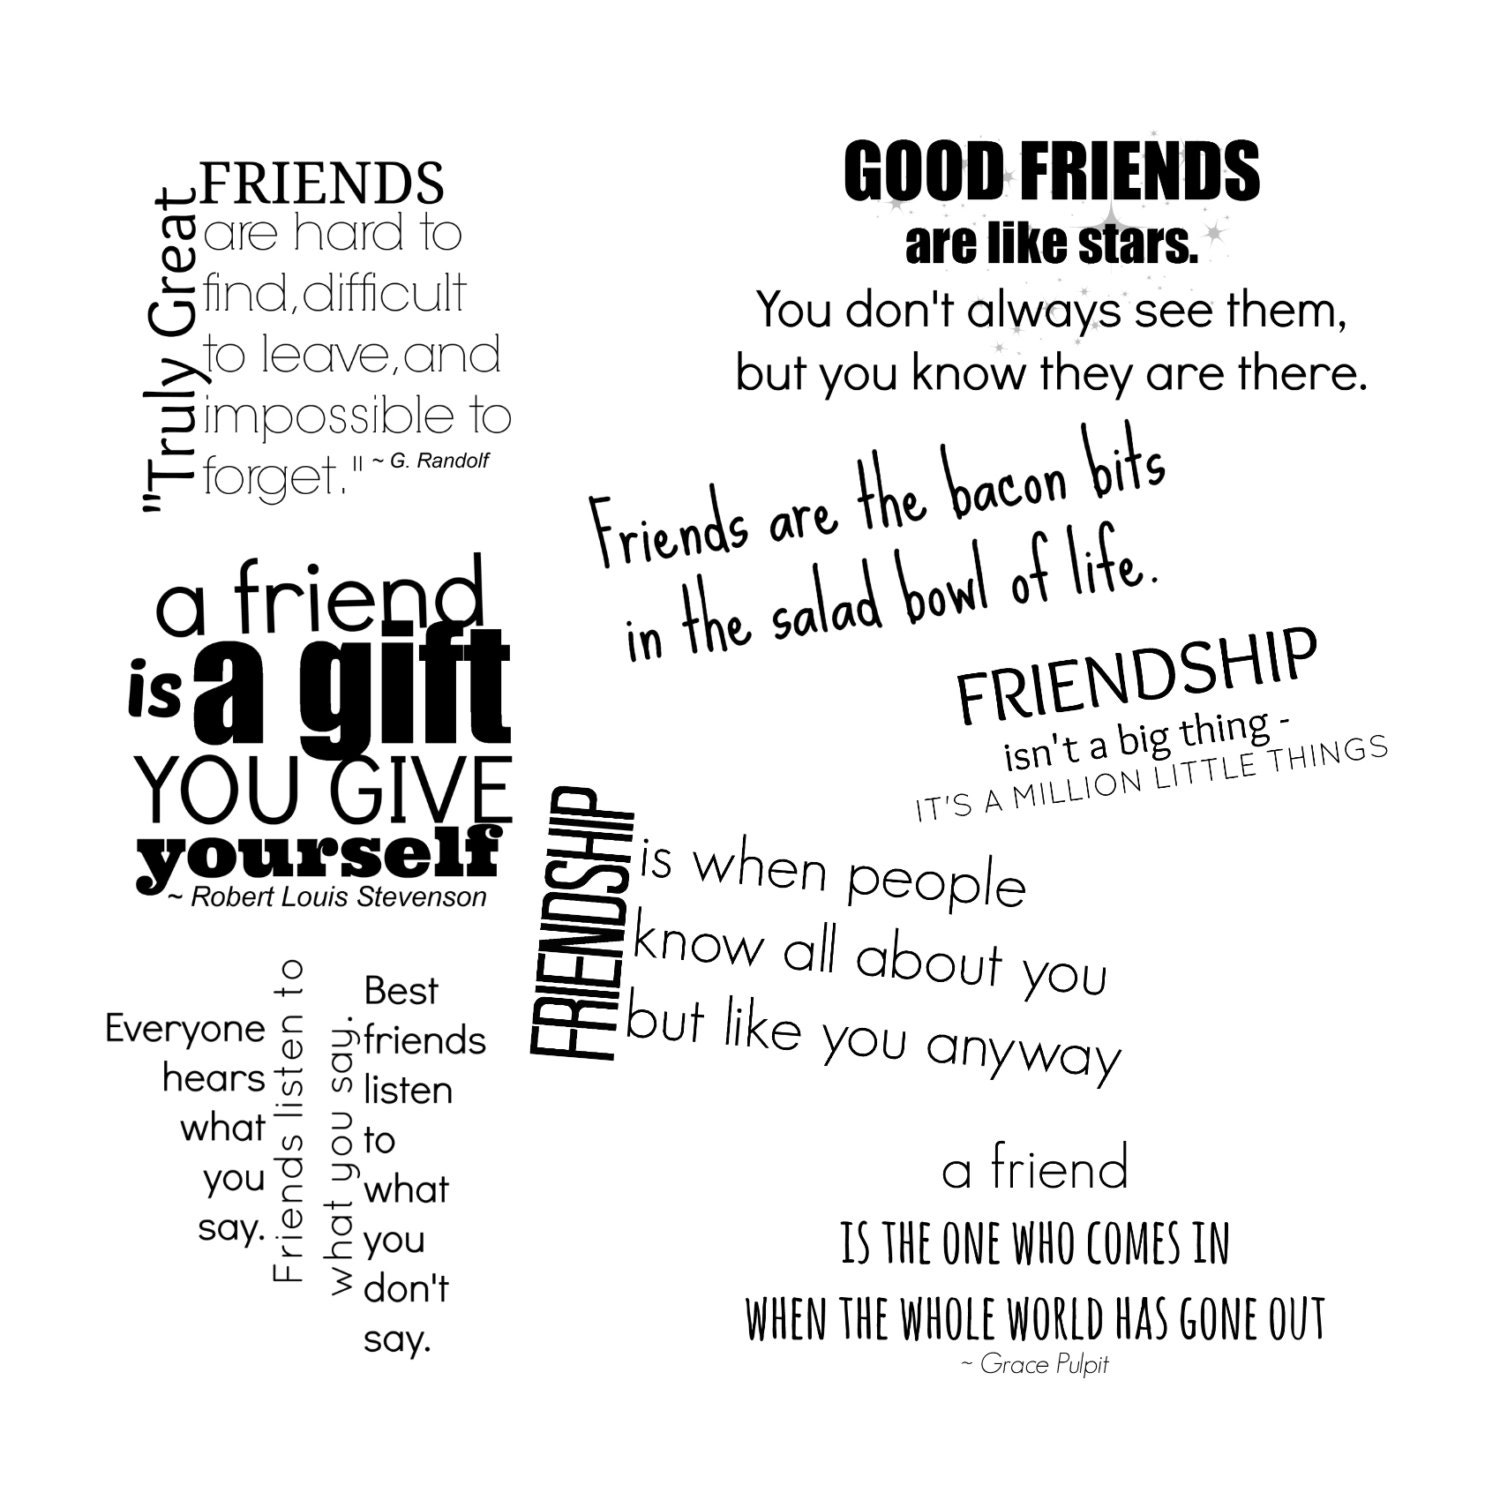 Best friends listening. Phrases about Friendship. Phrases about friends. Friendship Word. Best friend scrapbook quotes.